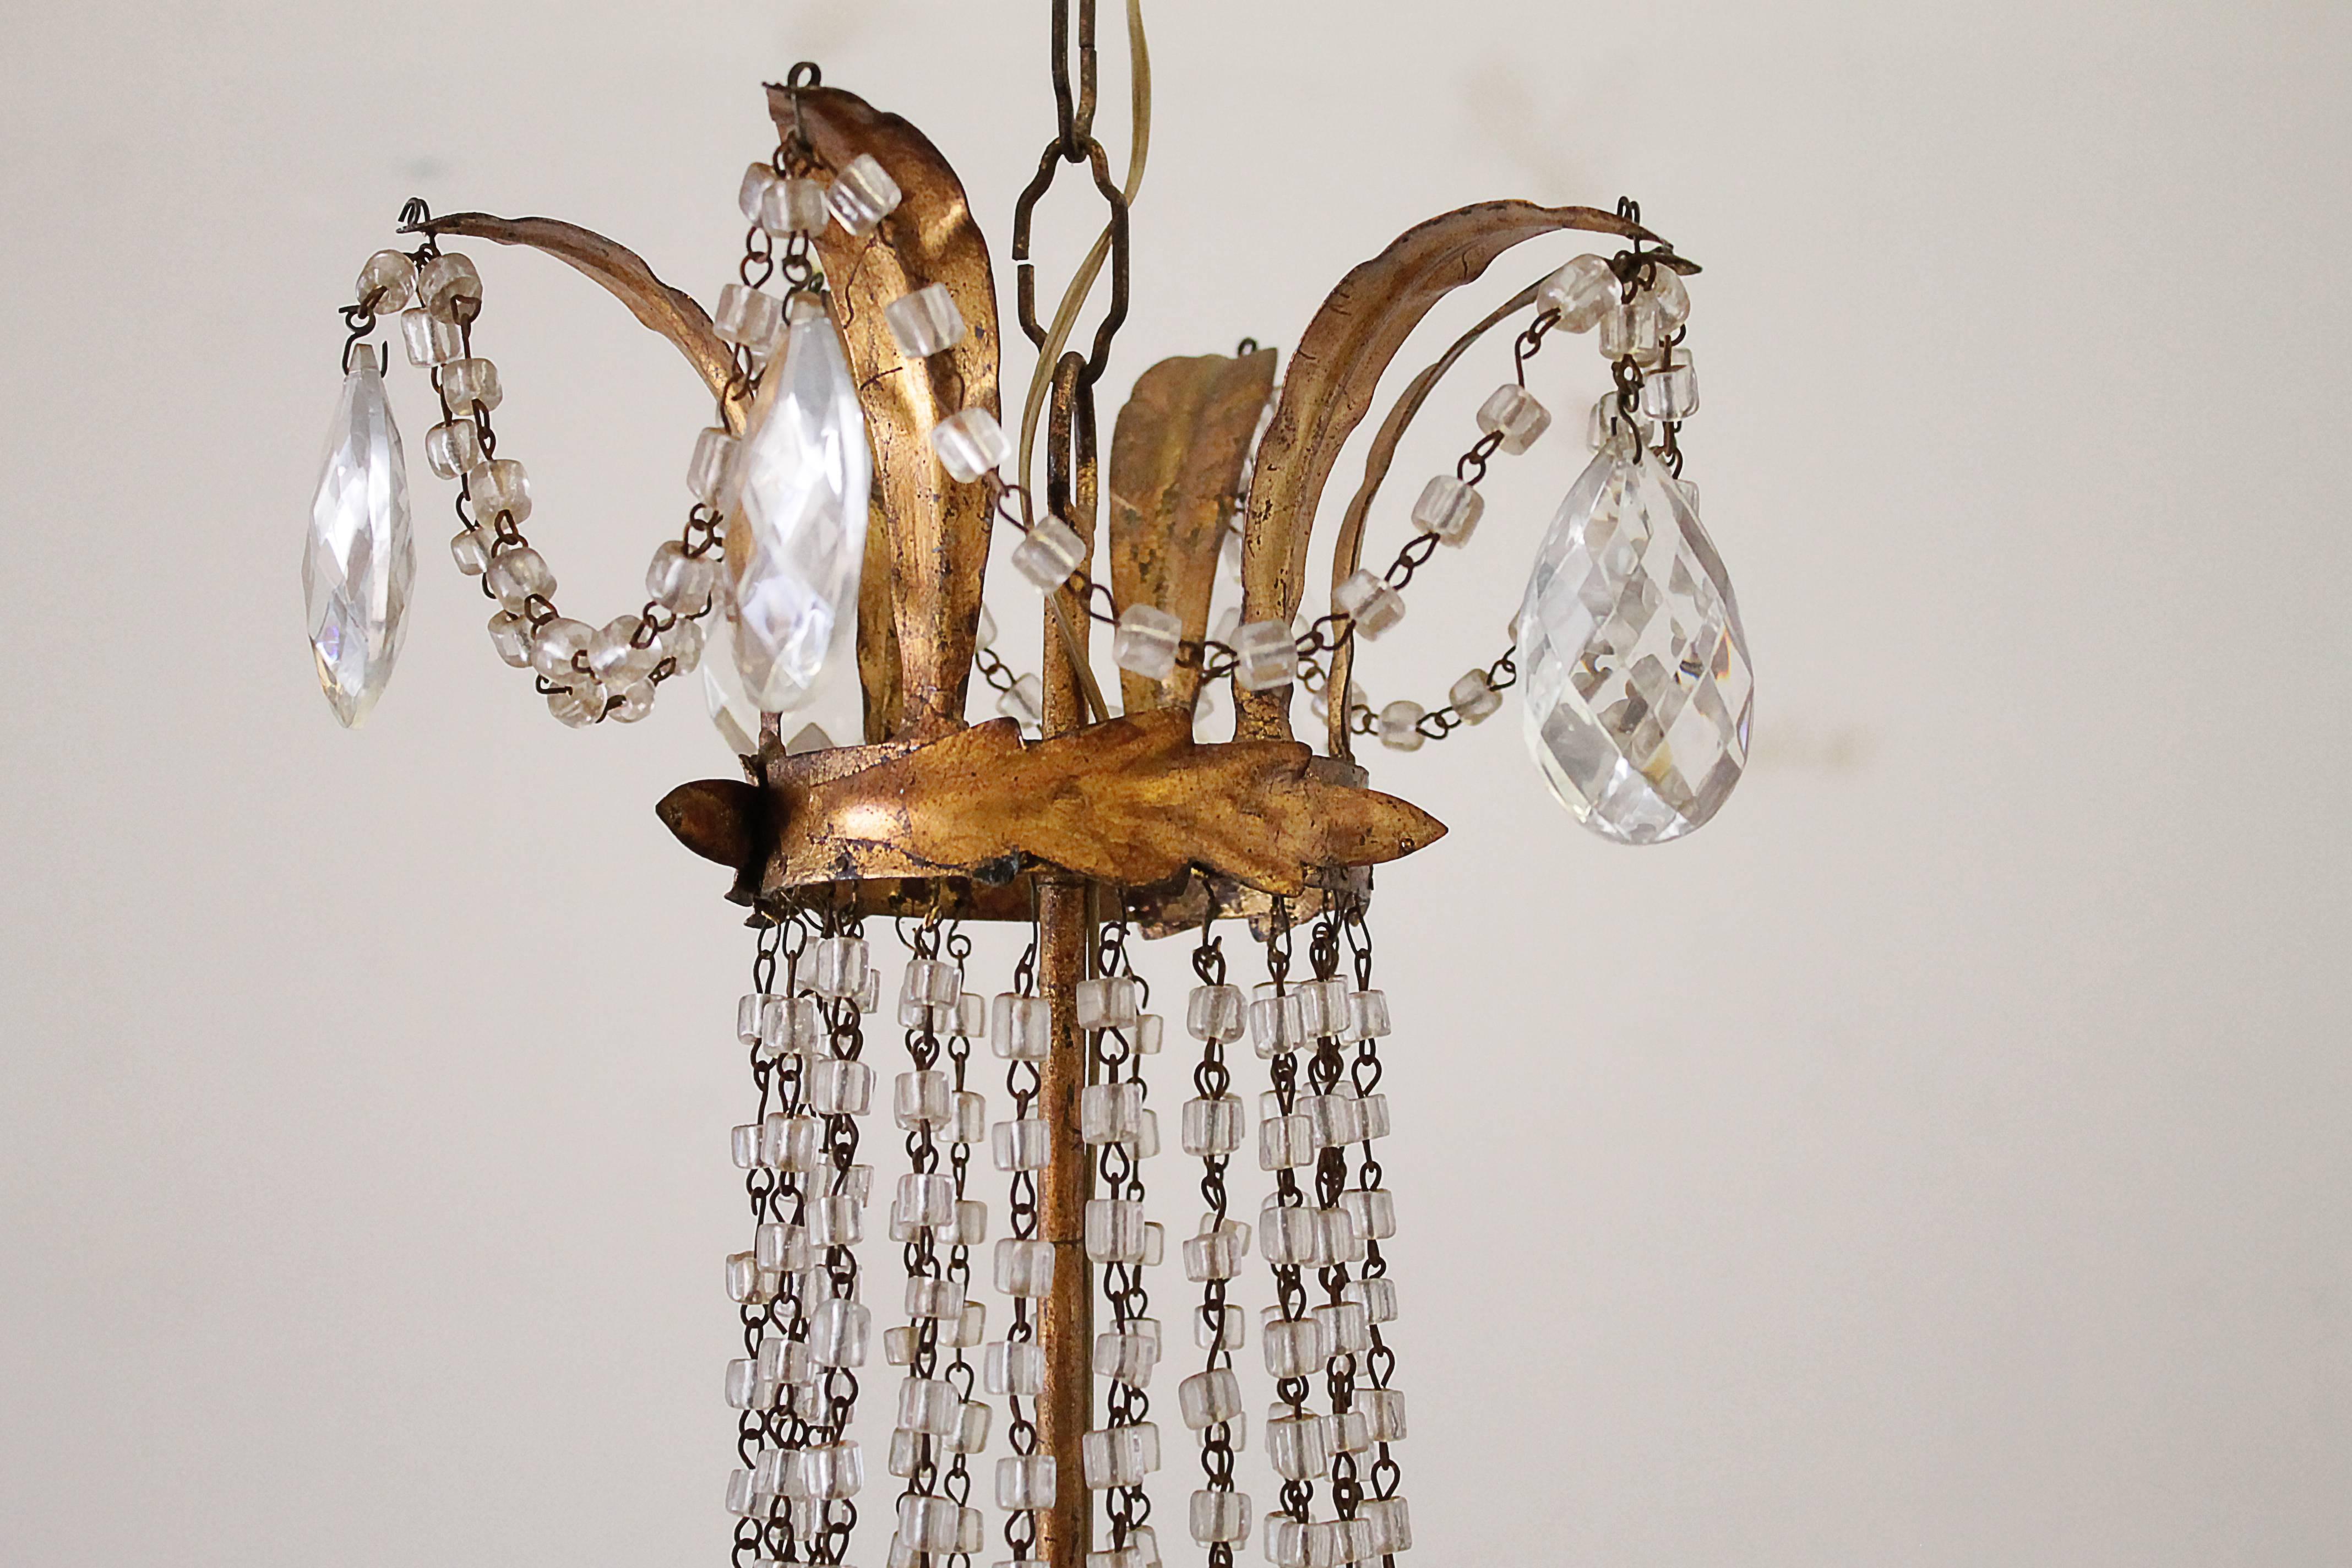 20th century Italian Macaroni beaded tole chandelier with six lights. The sockets have all been newly replaced, and is ready for a US bulb, with faux wax candle cover sleeves, ready to hang. A beautiful gilt antique patina finish. This chandelier